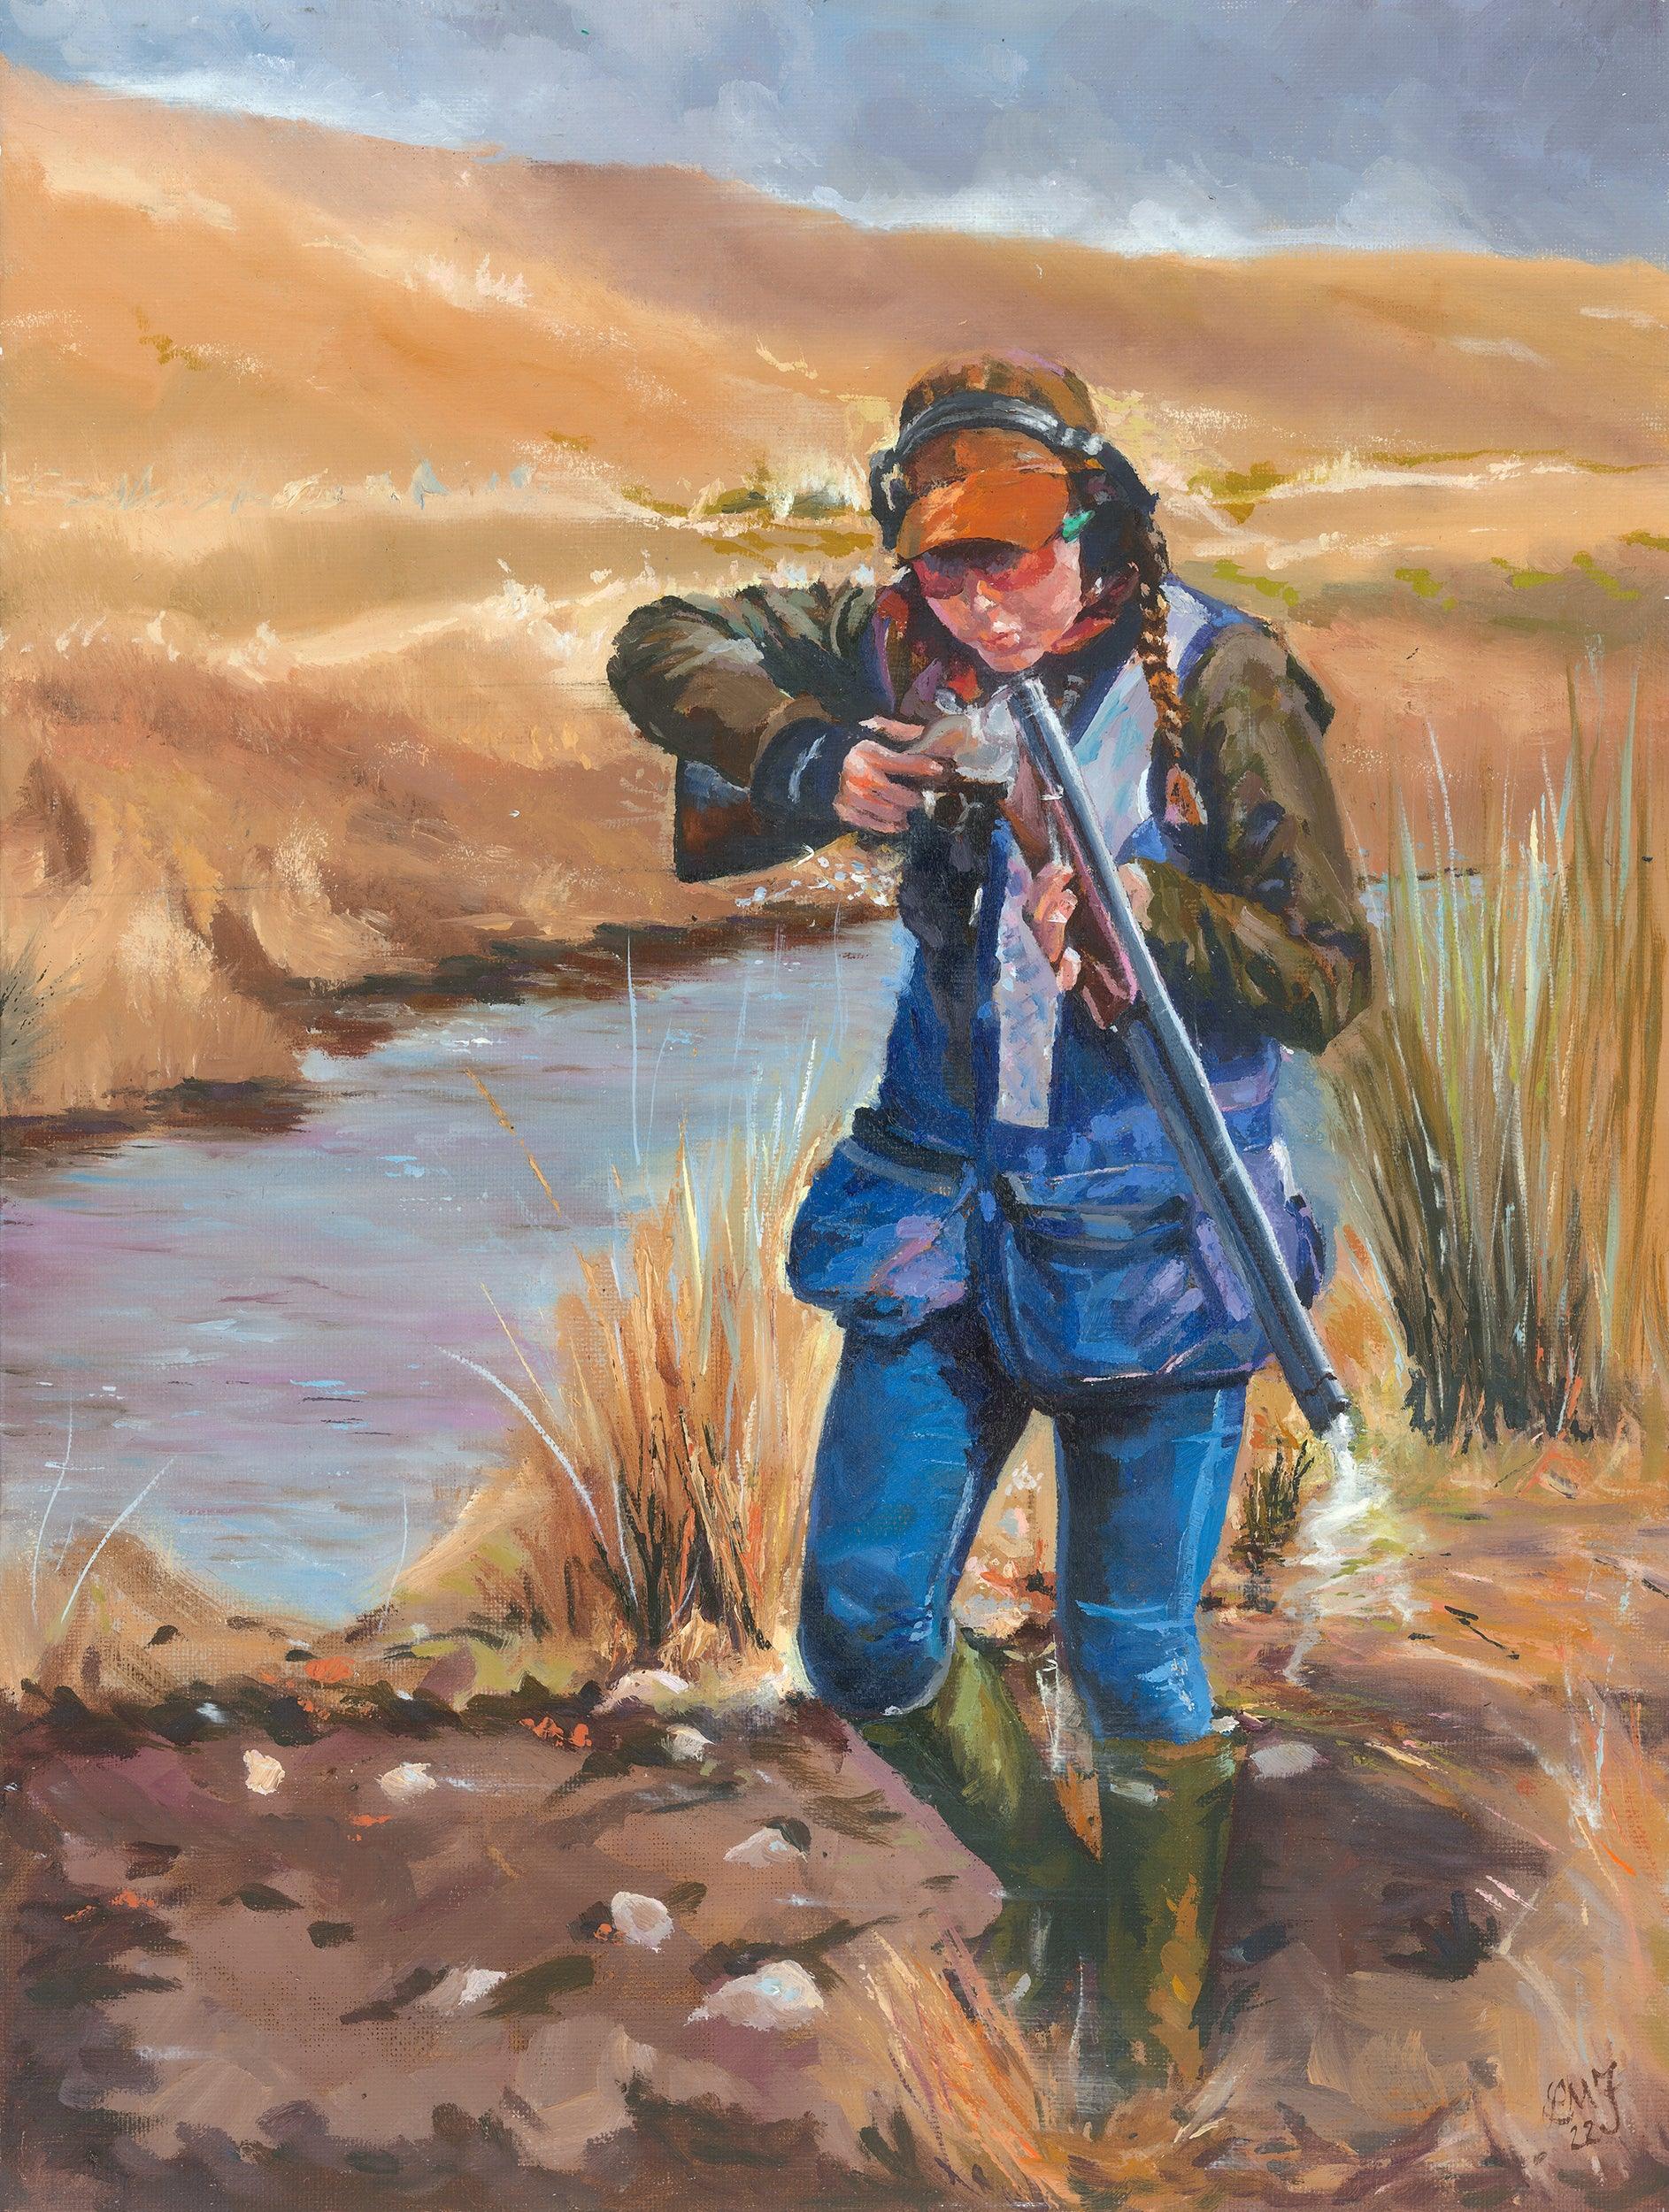 A young woman in the Highlands of Scotland Clay pigeon shooting  - lorrainefield